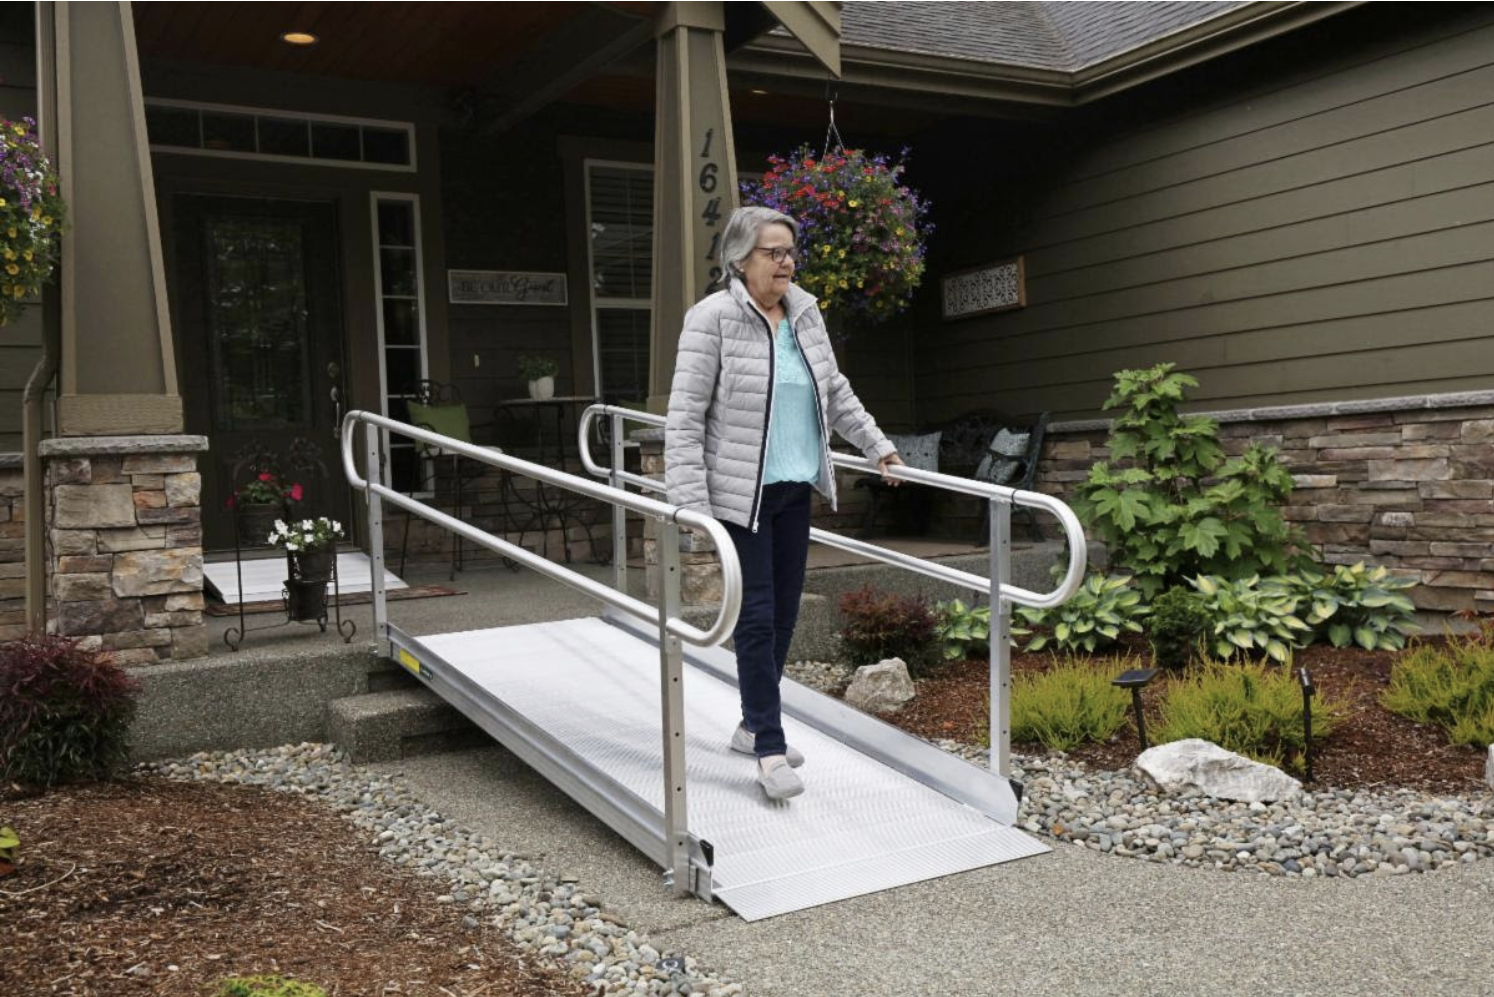 EZ-ACCESS Gateway 3G Portable Solid Surface Mobility Ramps with Vertical Picket Handrails - 6 Foot